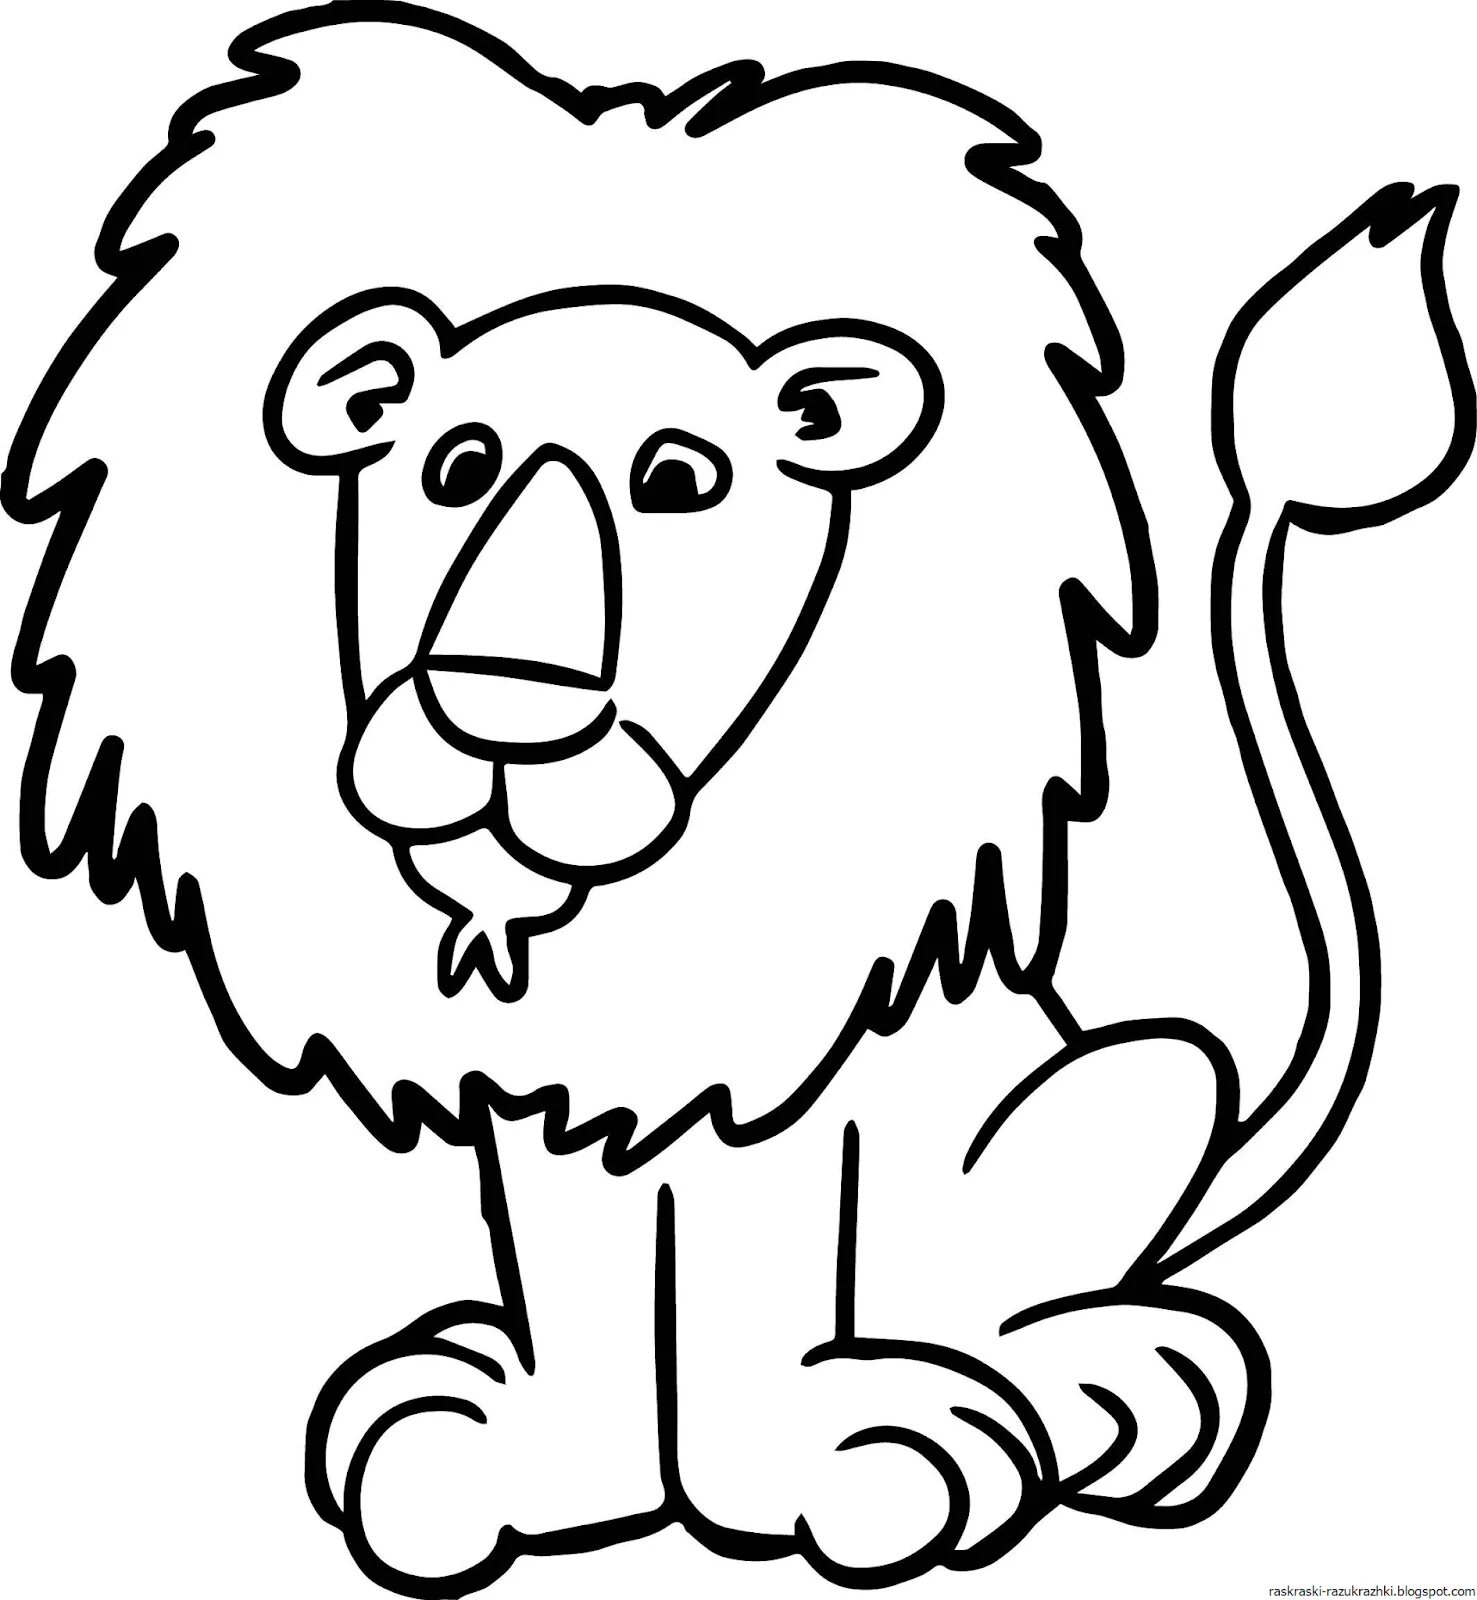 Creative lion coloring book for 3-4 year olds